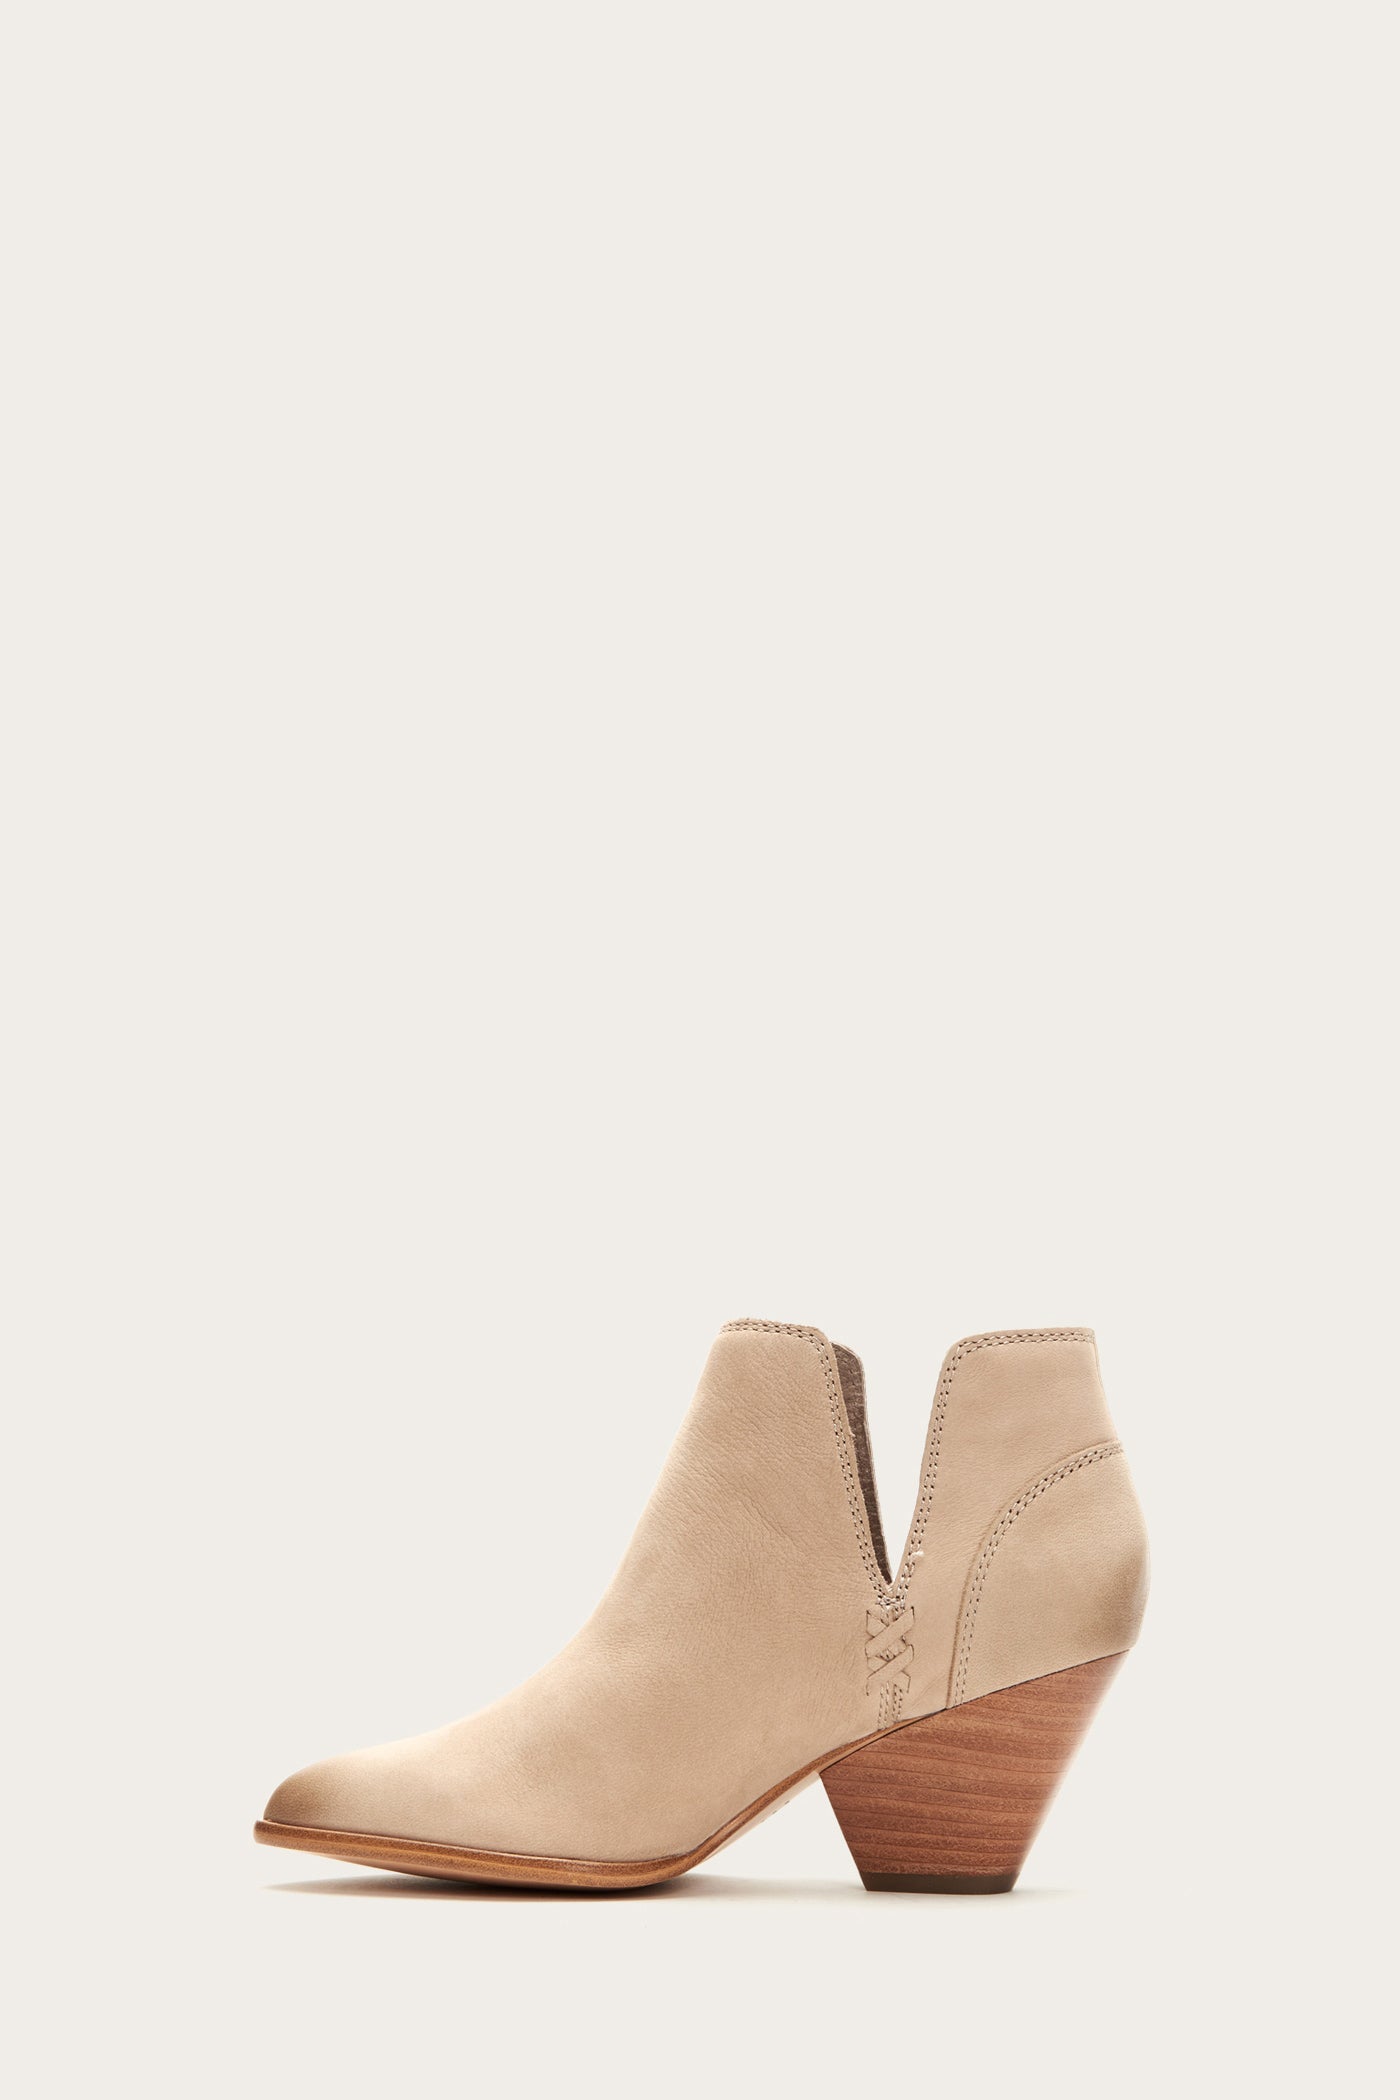 frye reina leather cutout bootie